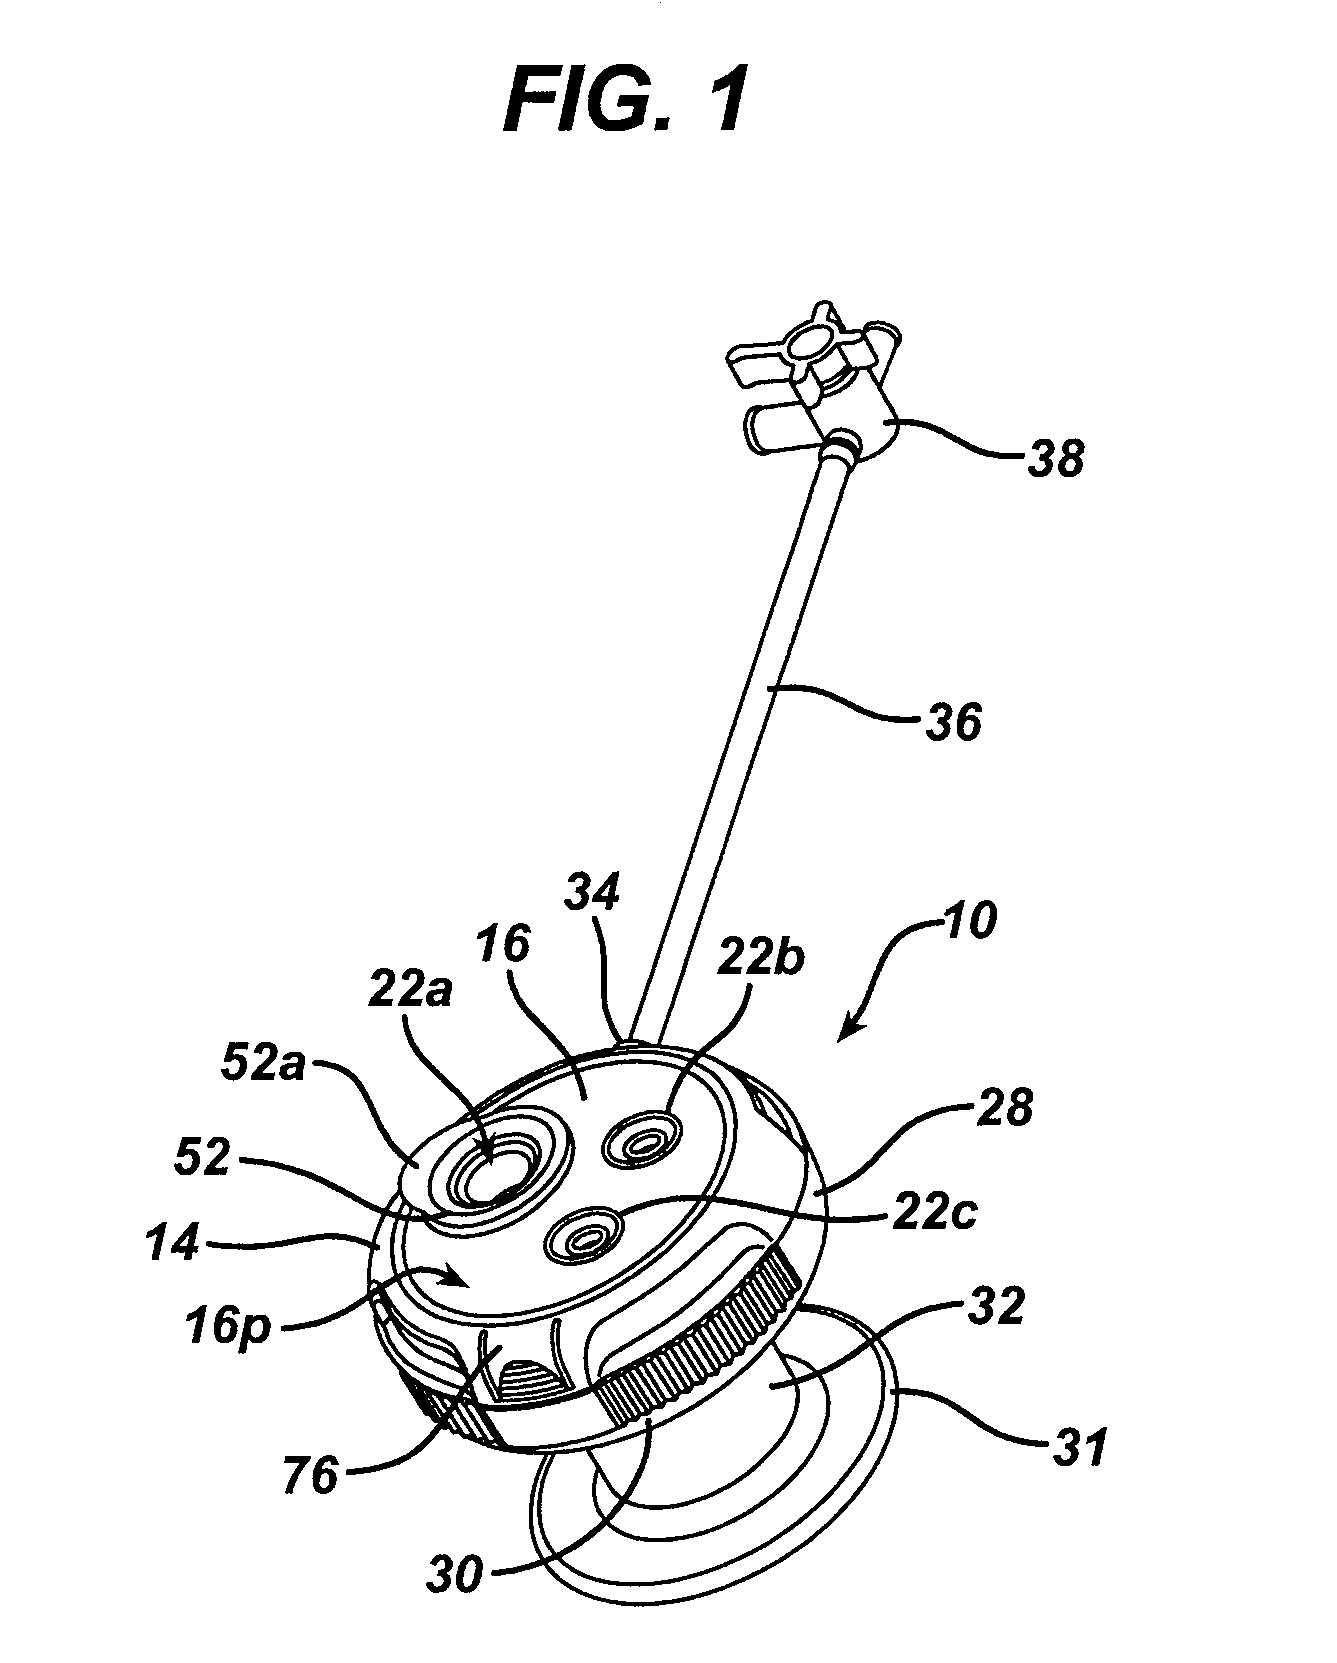 Methods and devices for providing access into a body cavity